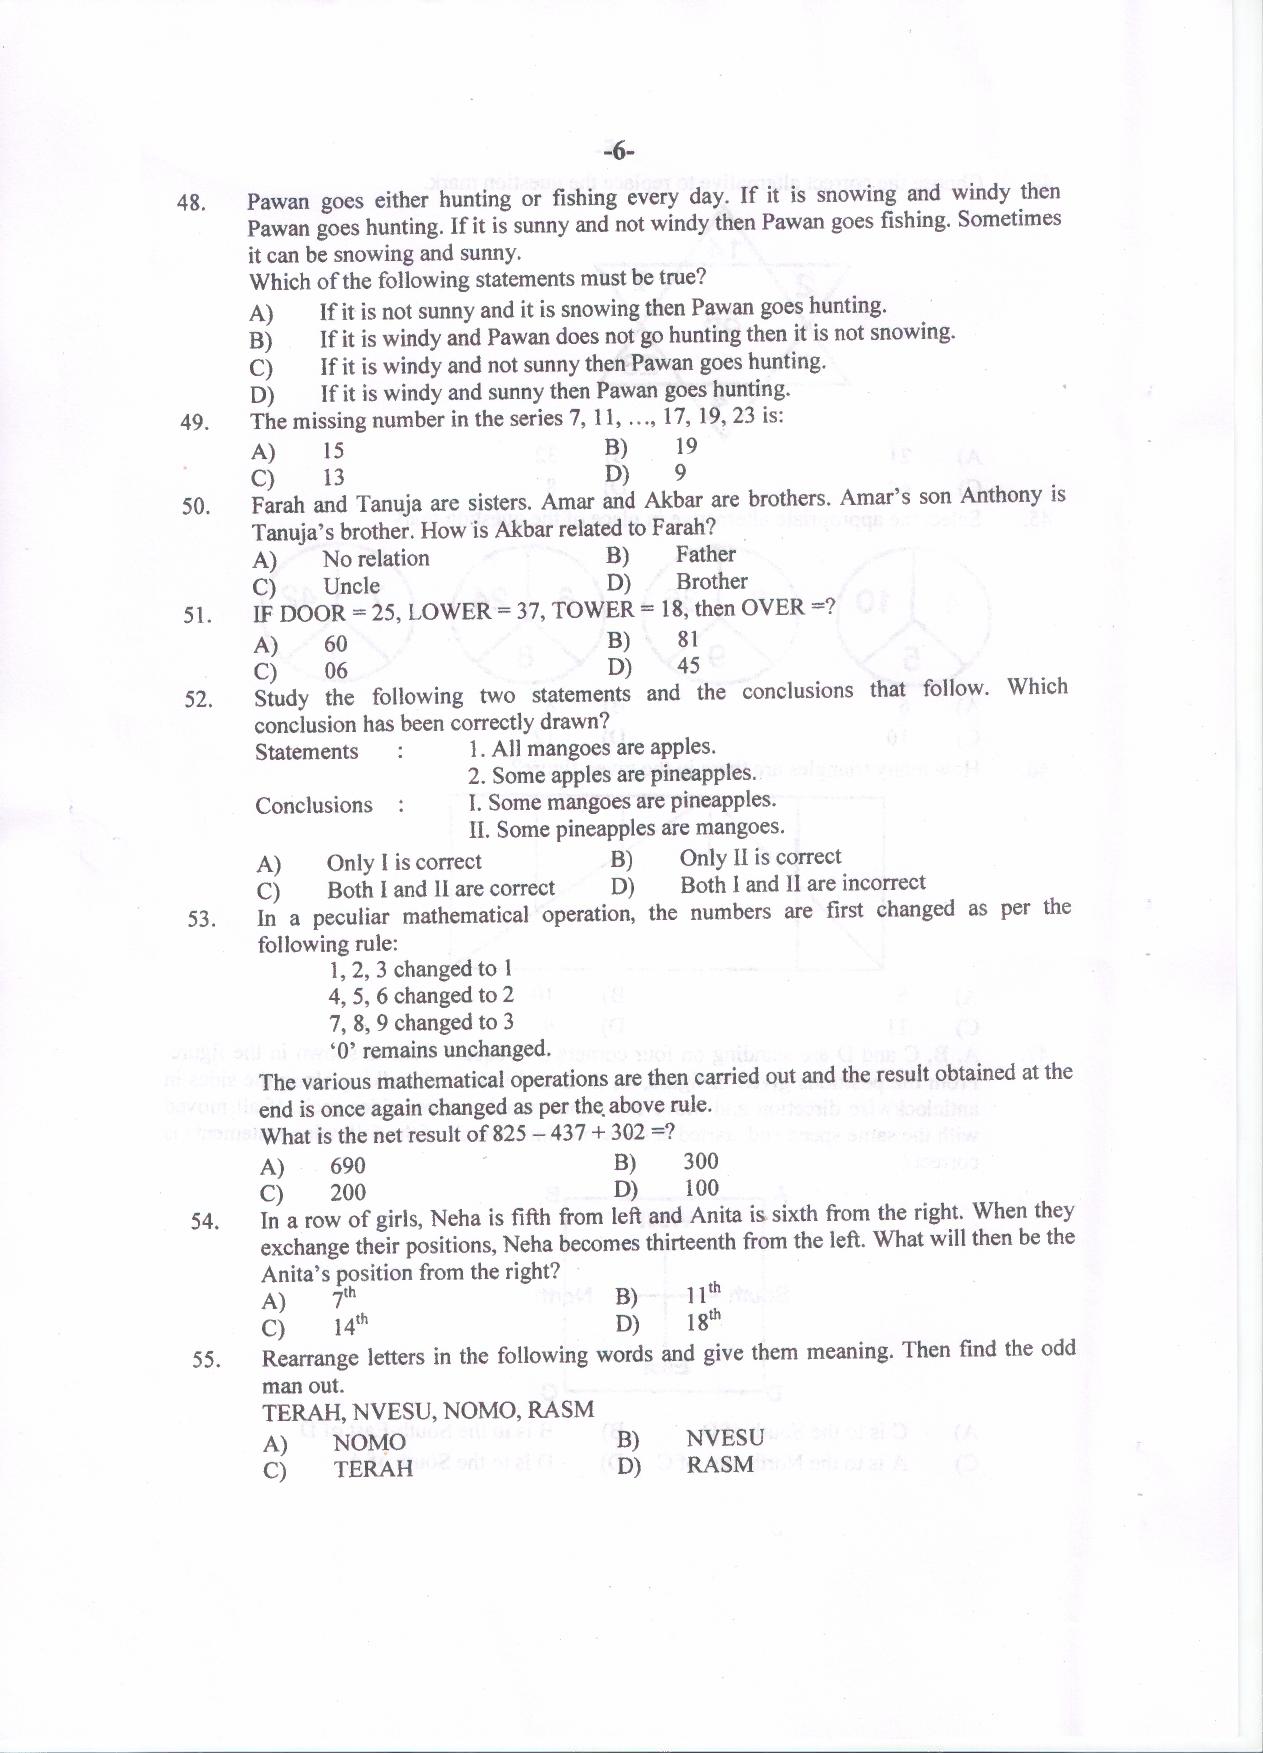 PU MET 2014 Question Booklet with Key - Page 6